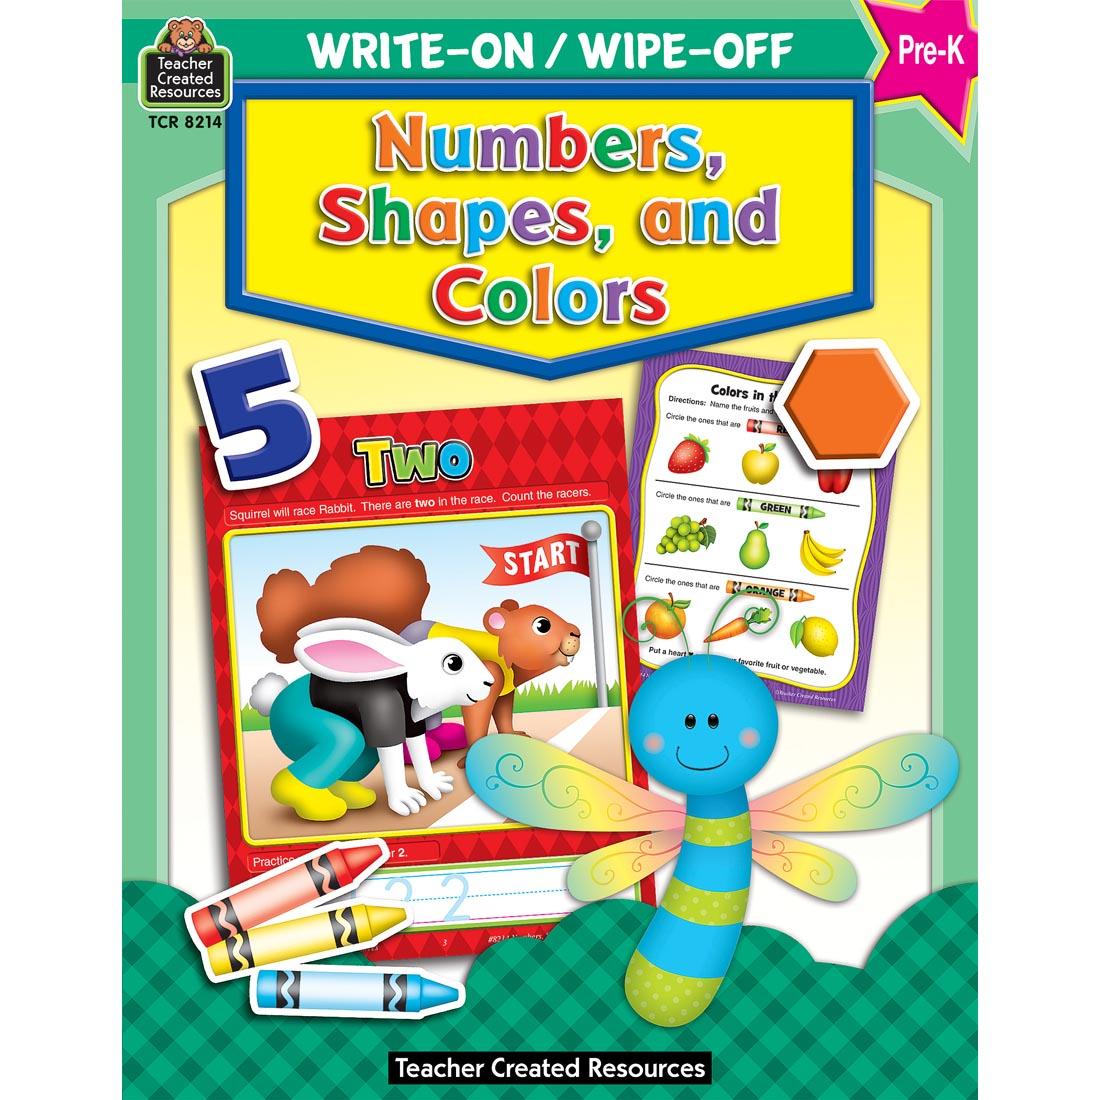 Numbers Shapes And Colors Write-On Wipe-Off Book